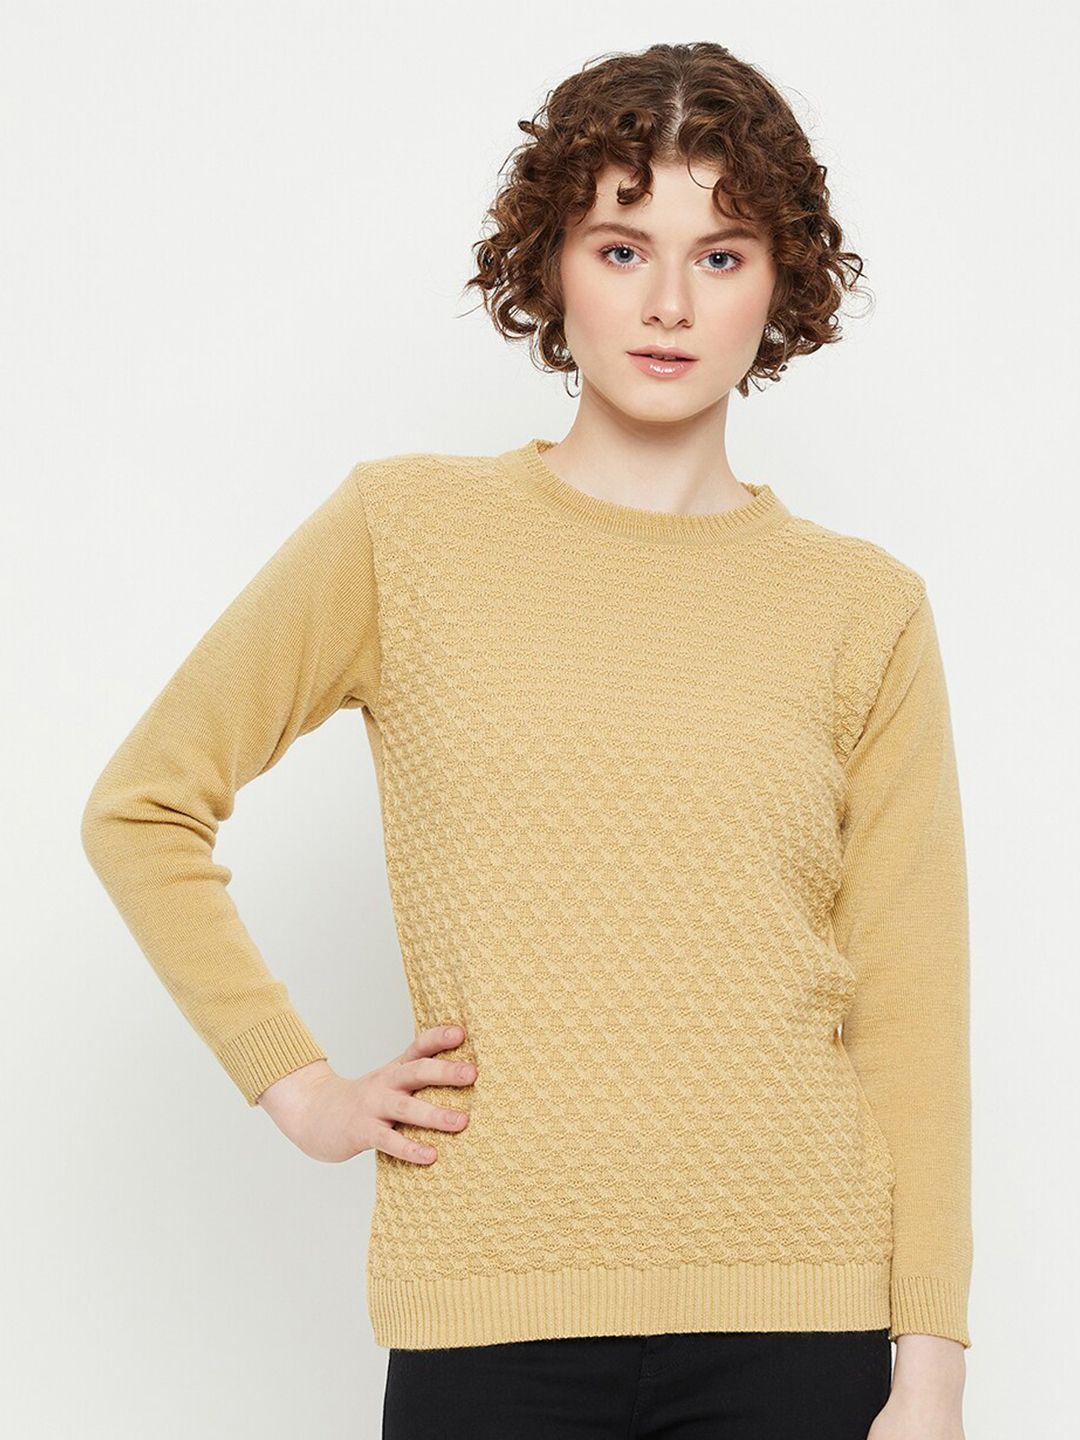 kasma-cable-knit-wool-pullover-sweater